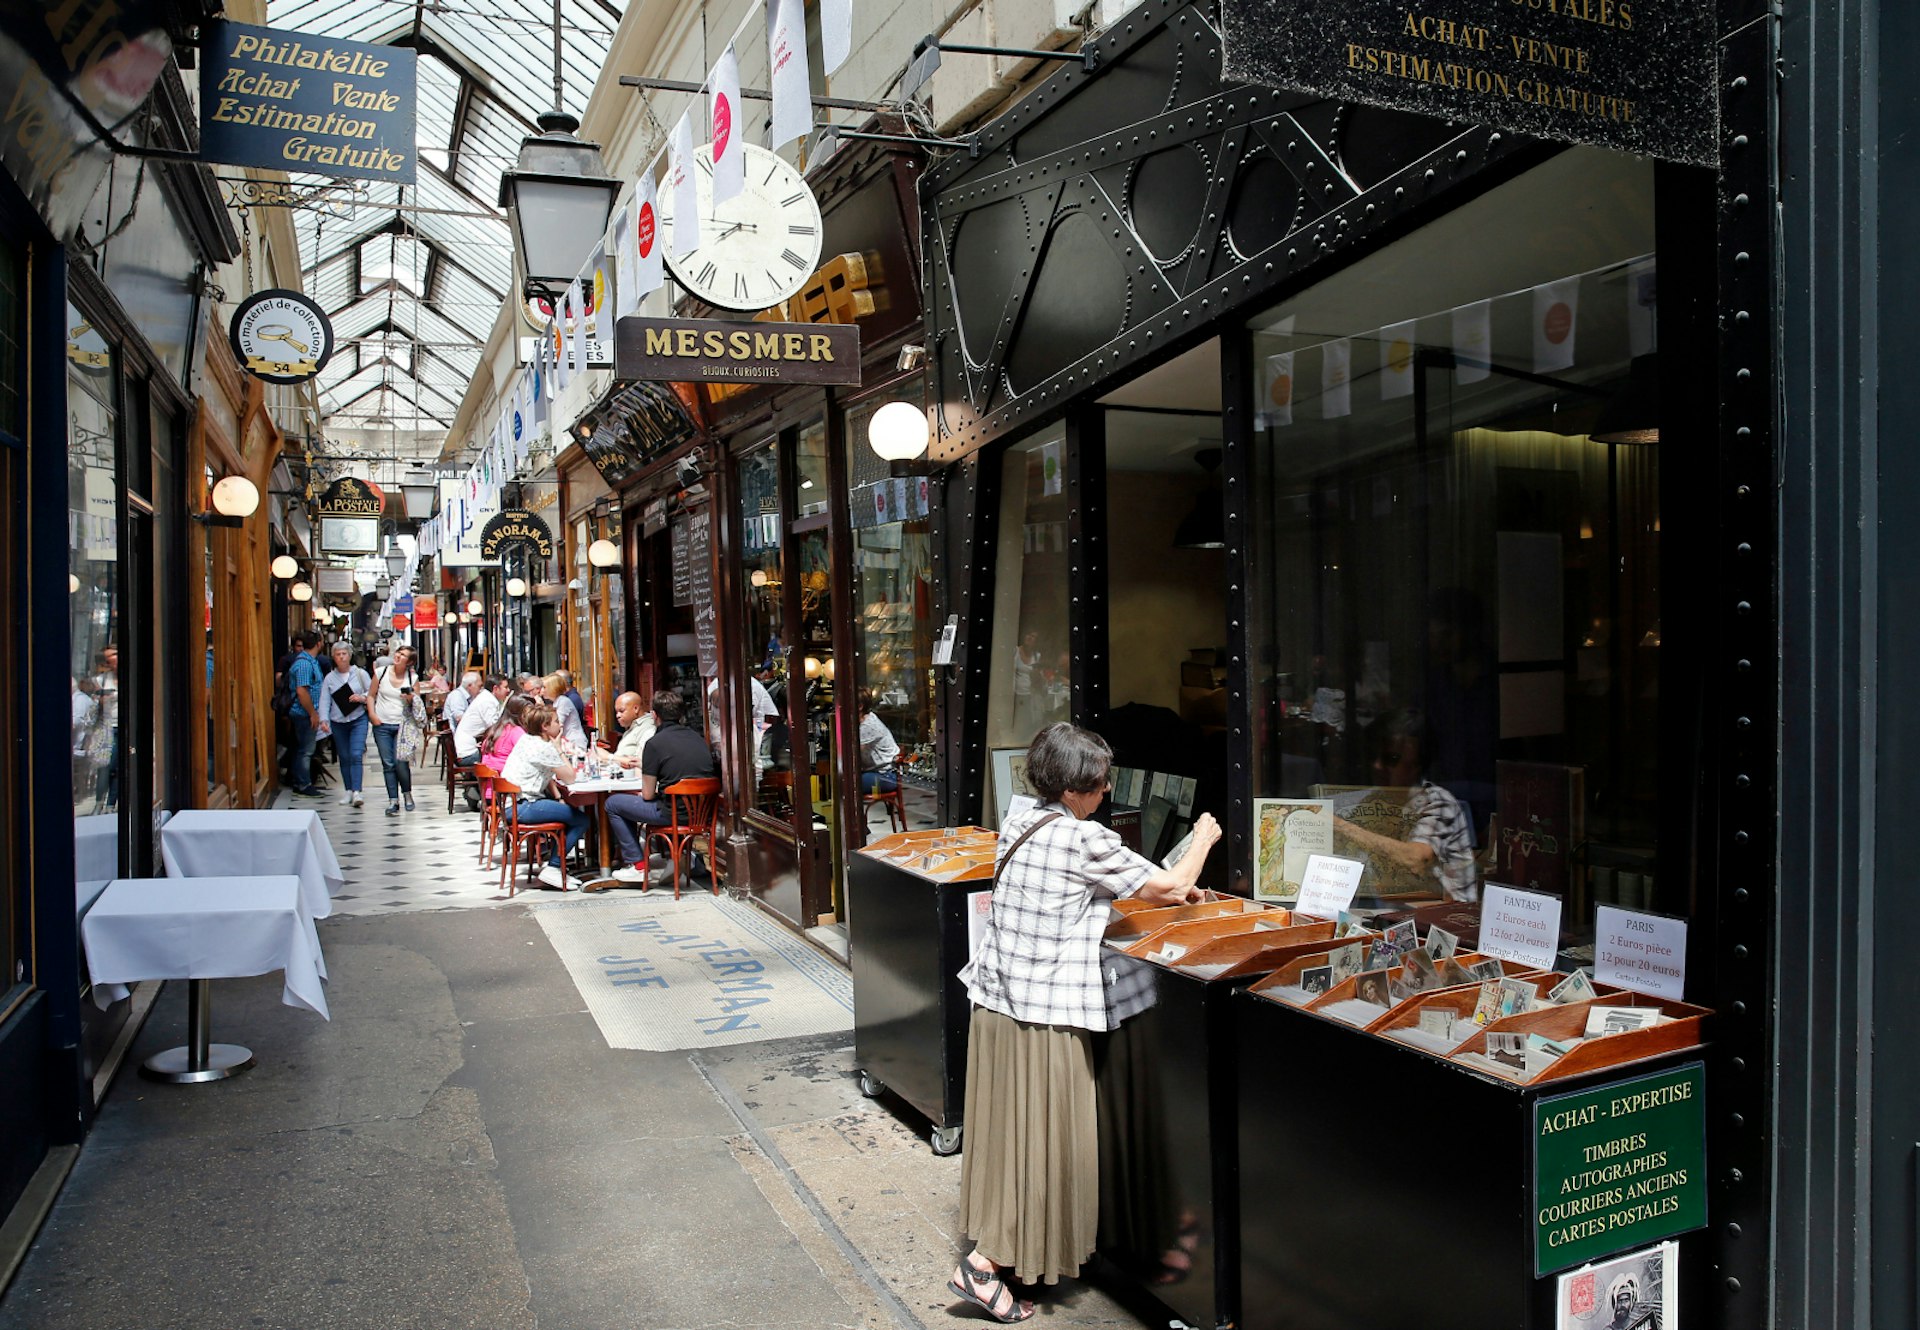 A lady looks through some wares of the Passage des Panoramas, while others stroll along or sit in chairs outside cafes.